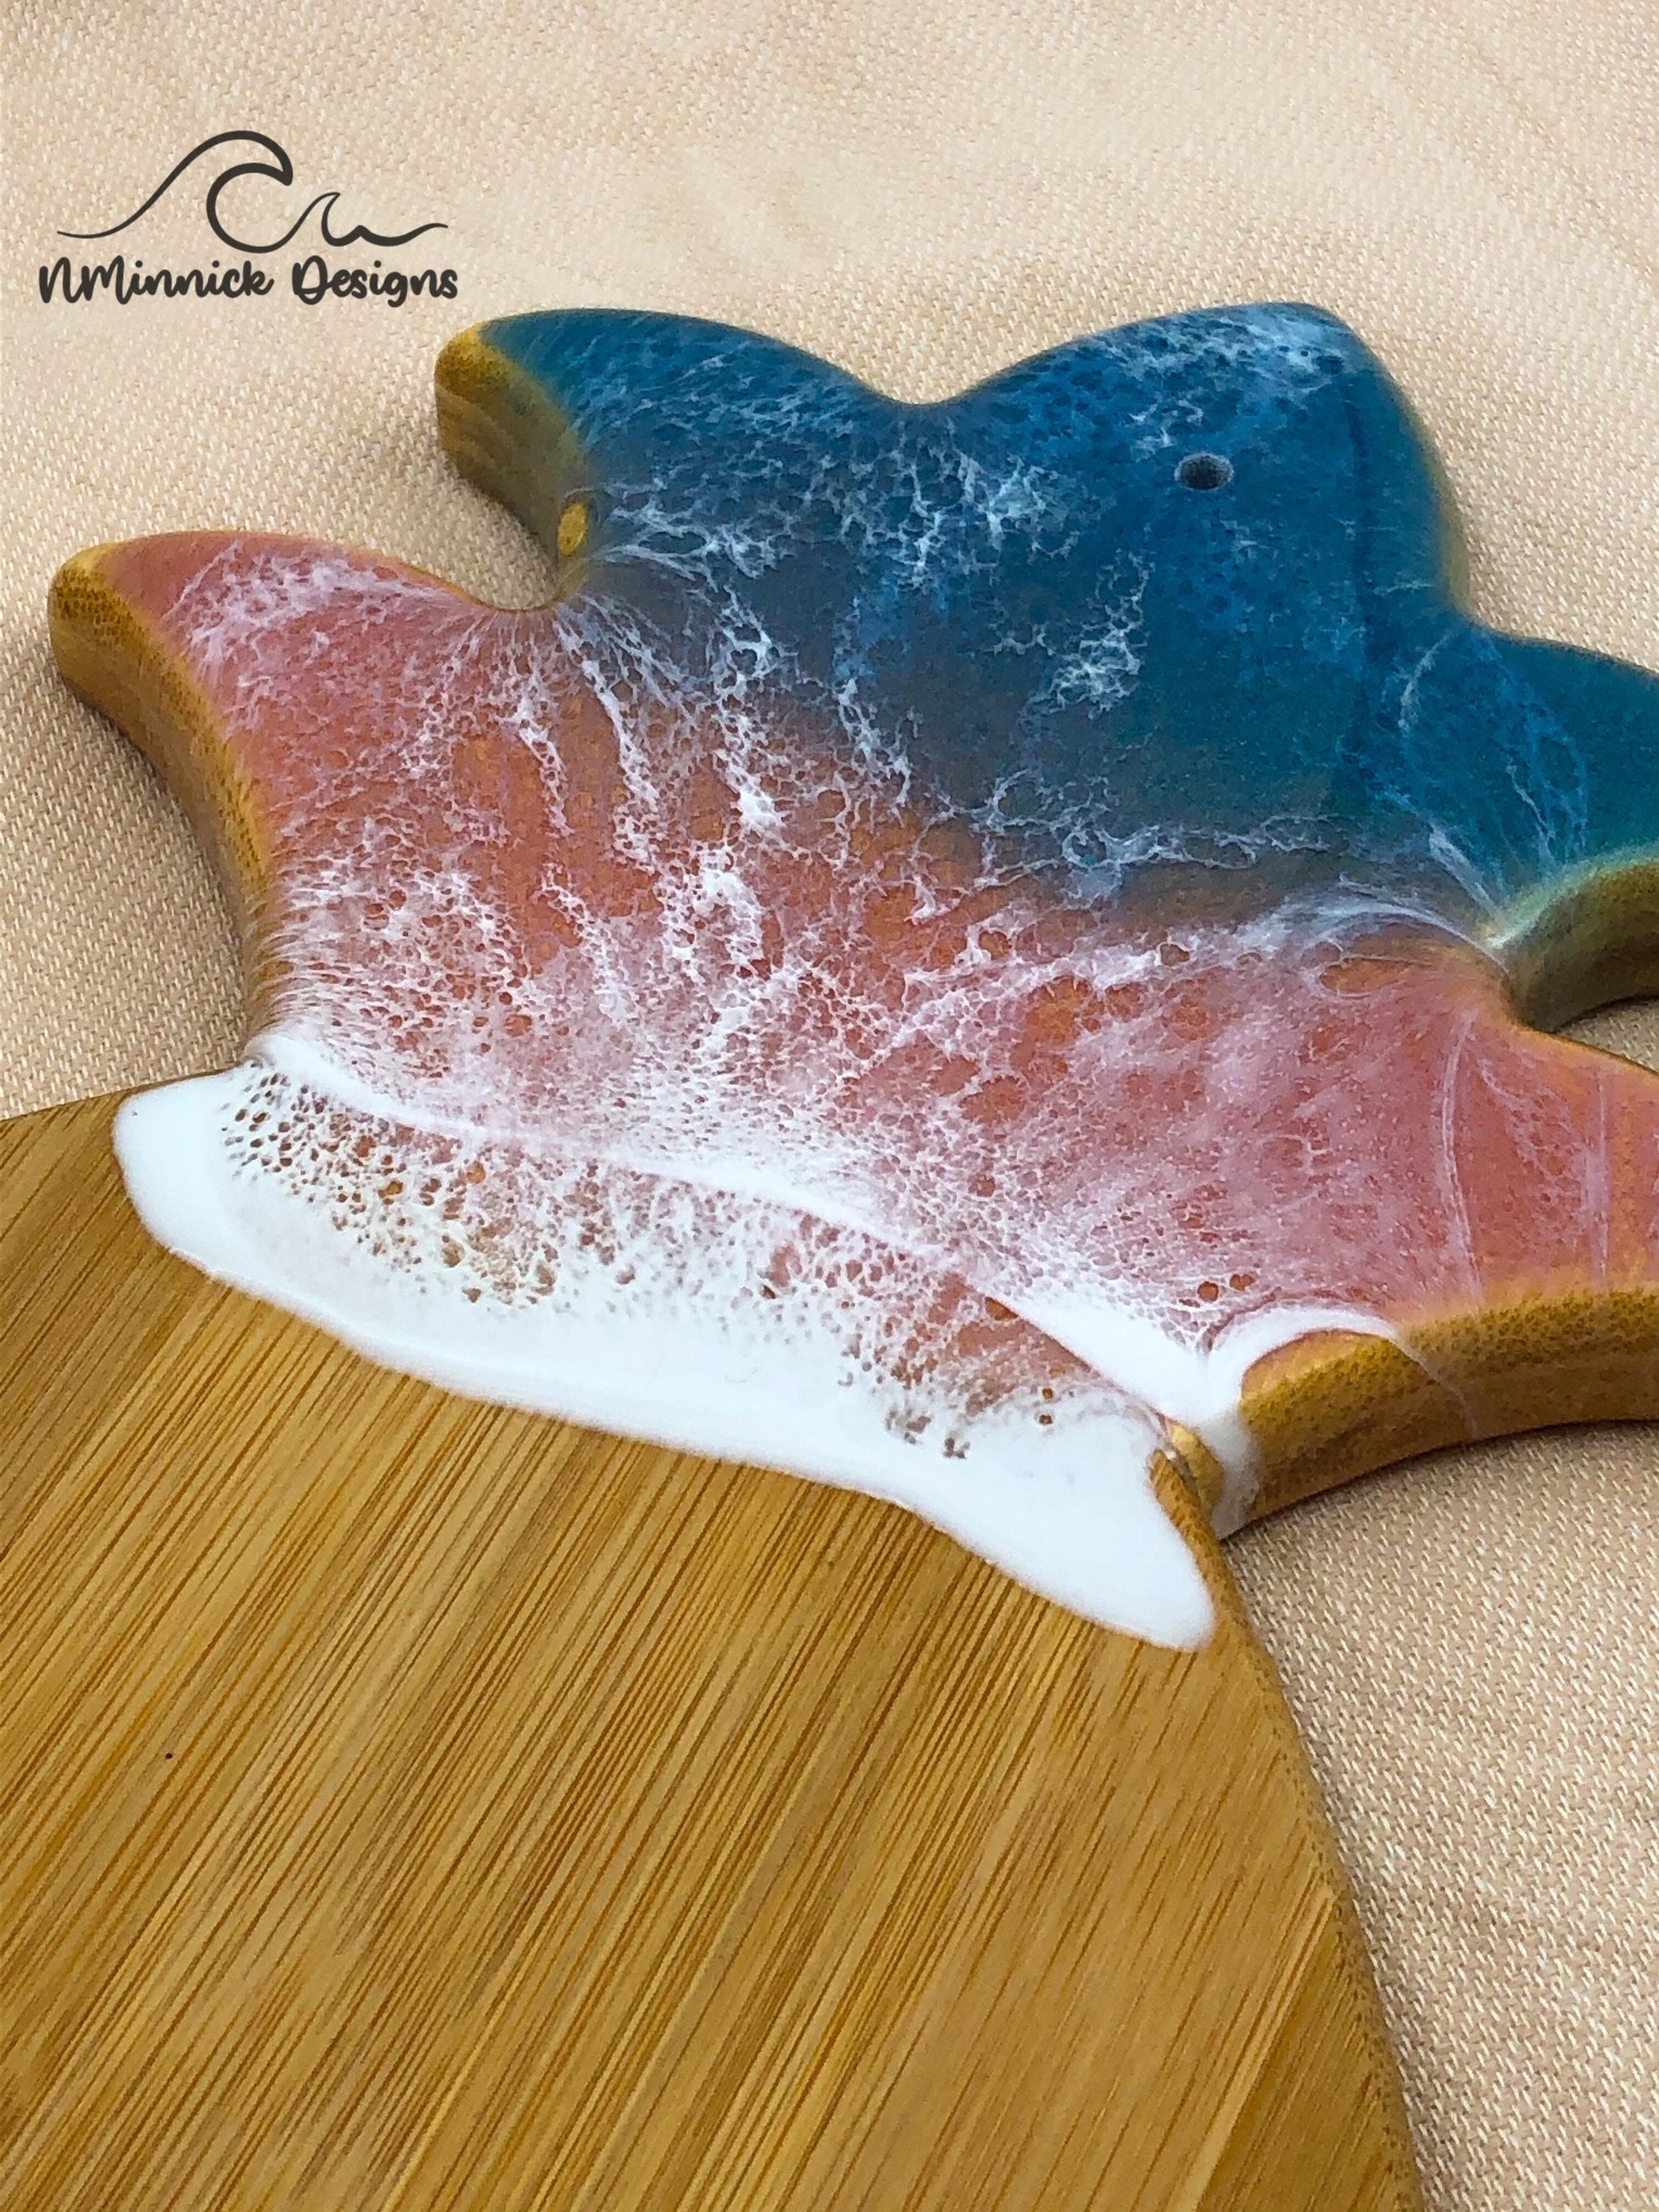 Pineapple-shaped bamboo serving board. Top portion covered in green and pink ocean resin art resembling the waves of the ocean. Laying on a tan beach towel next to a natural starfish (not included).